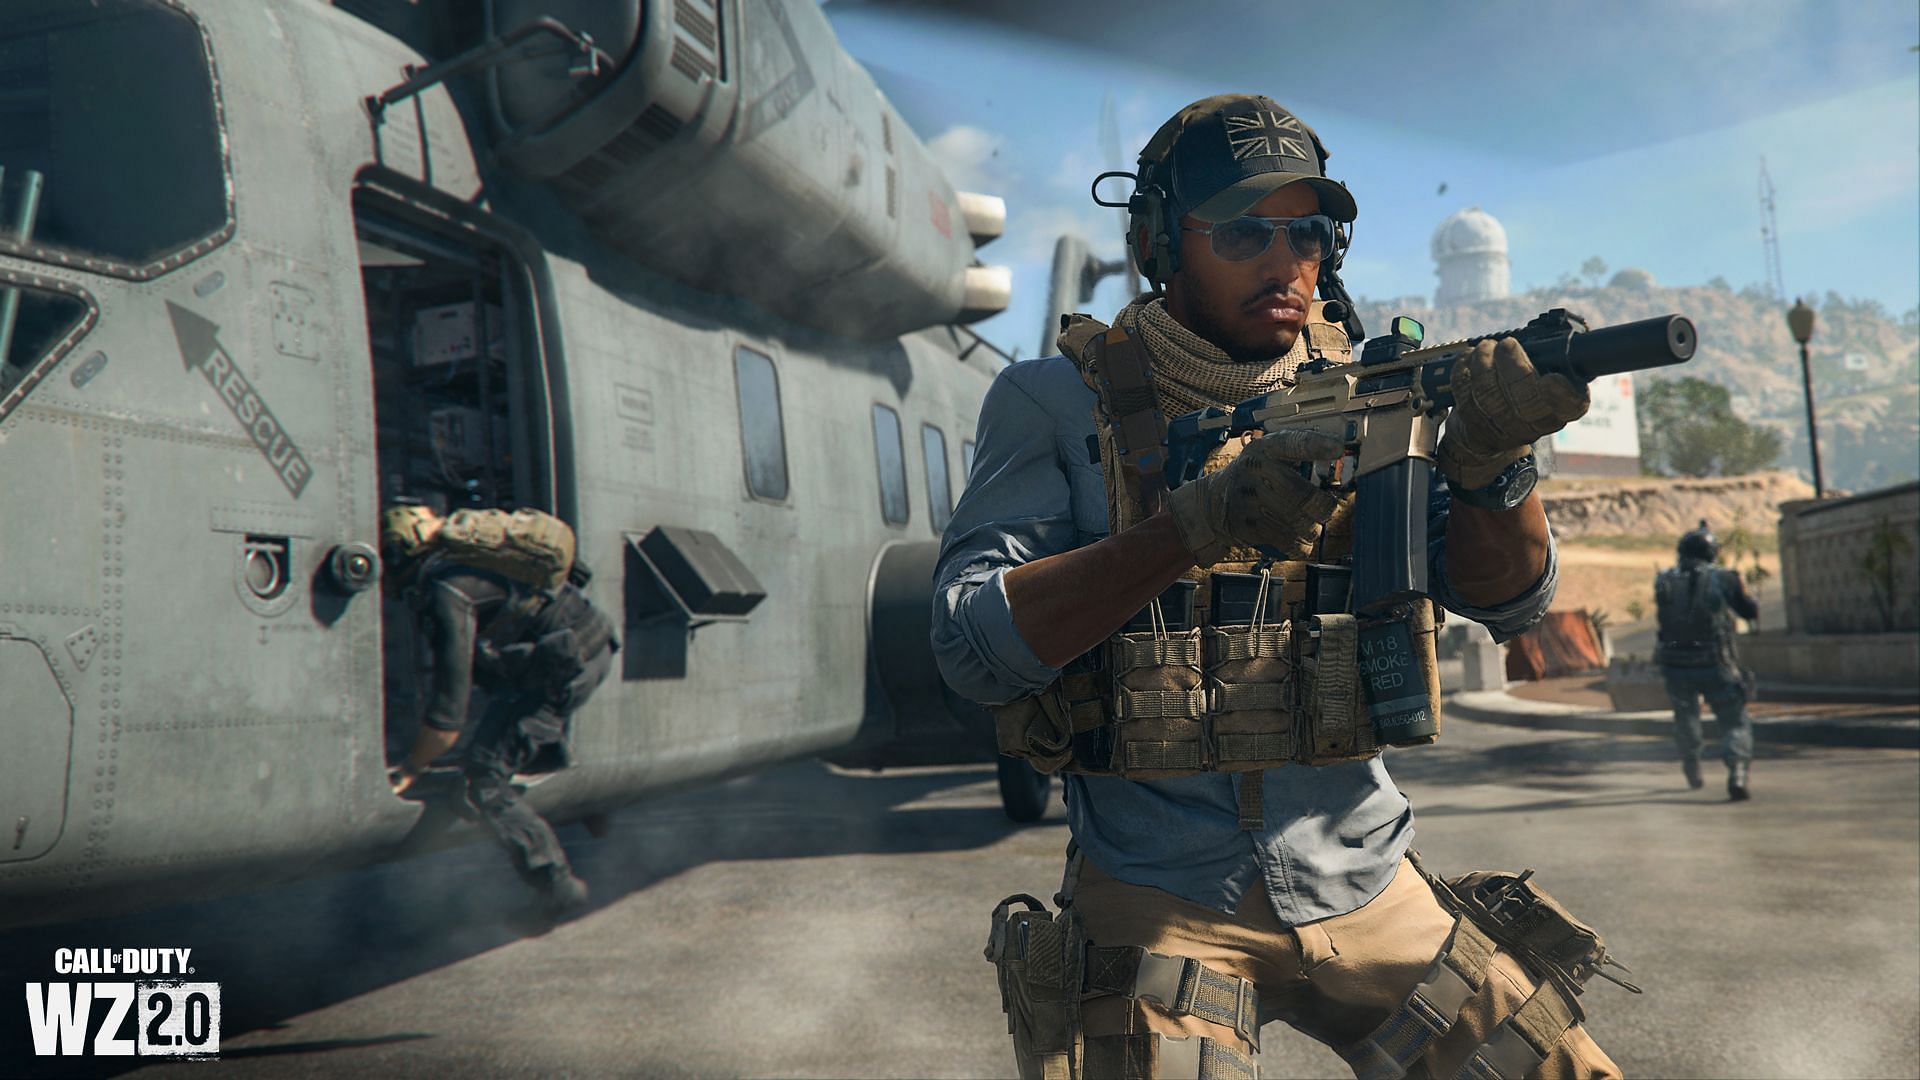 The Chimera Assault Rifle is a close range beast in Warzone 2 (Image via Activision)